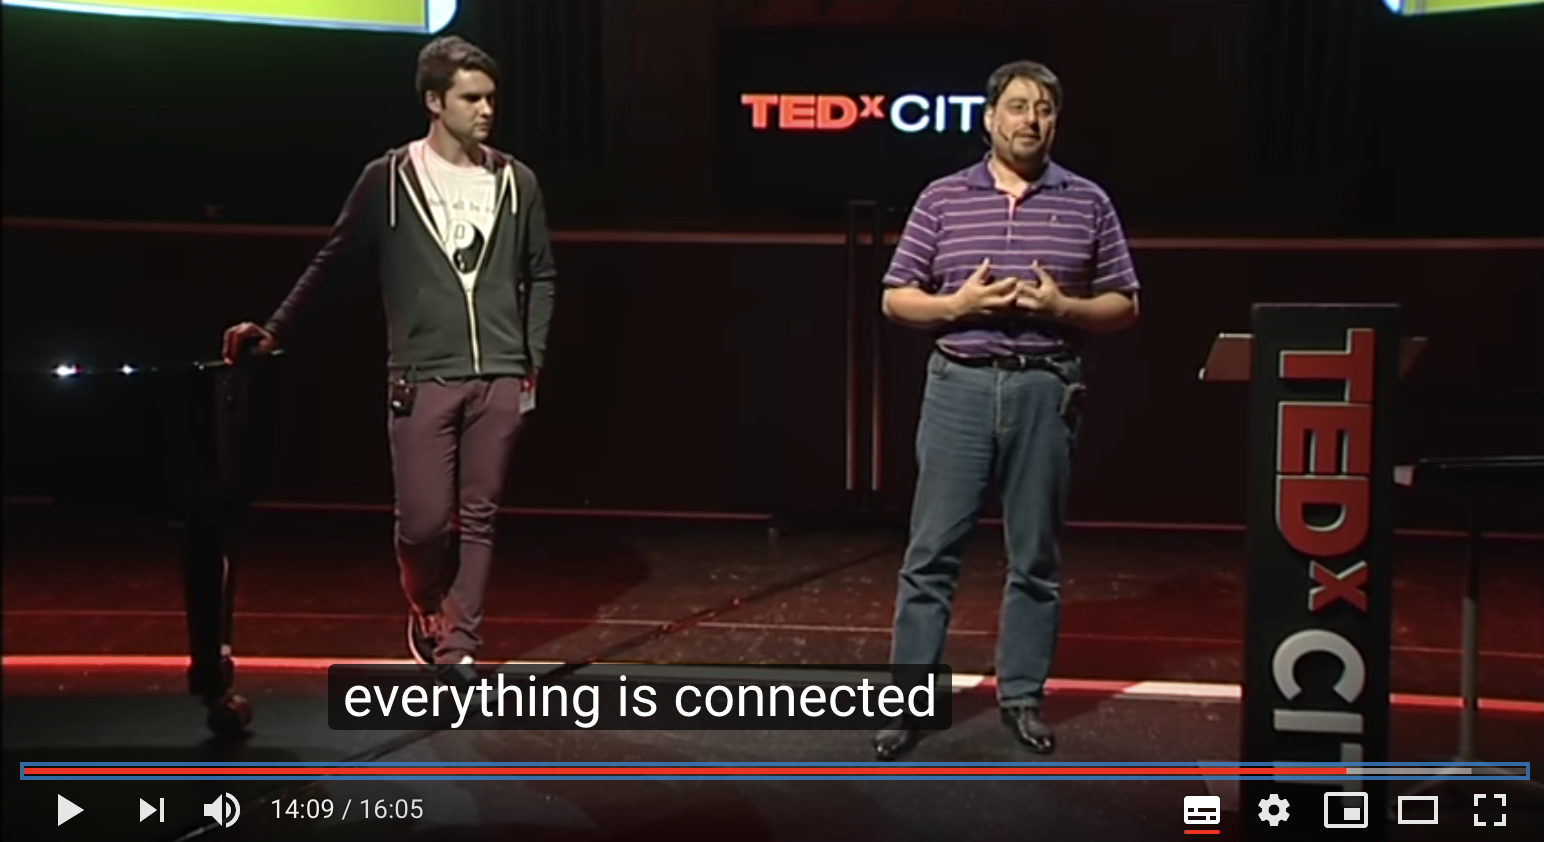 Users to Creators: Bill Liao and James Whelton at TEDxCIT